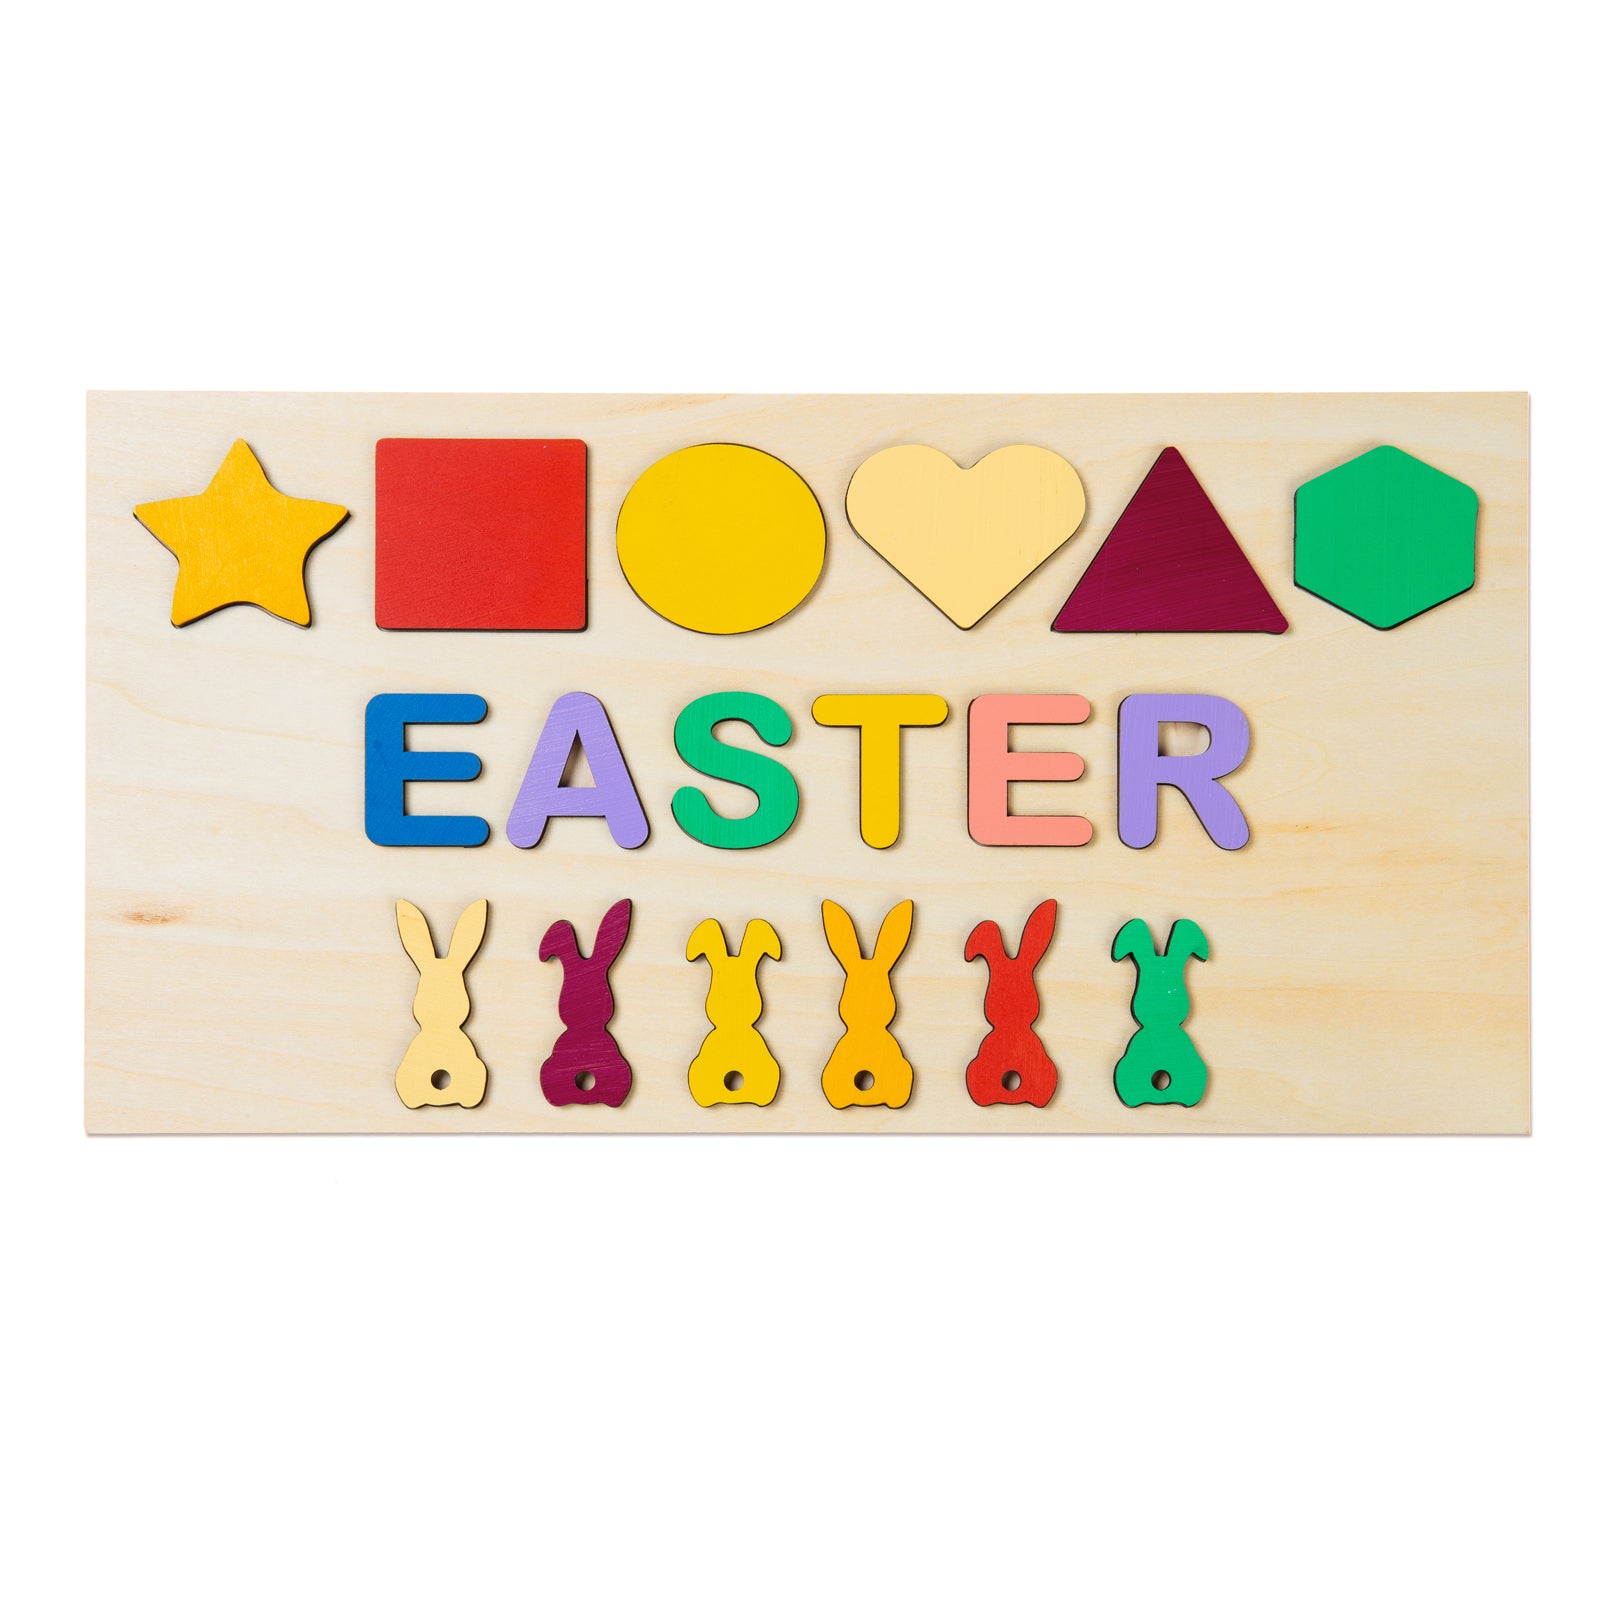 Custom Wooden Name Puzzle with Shapes and Bunnies